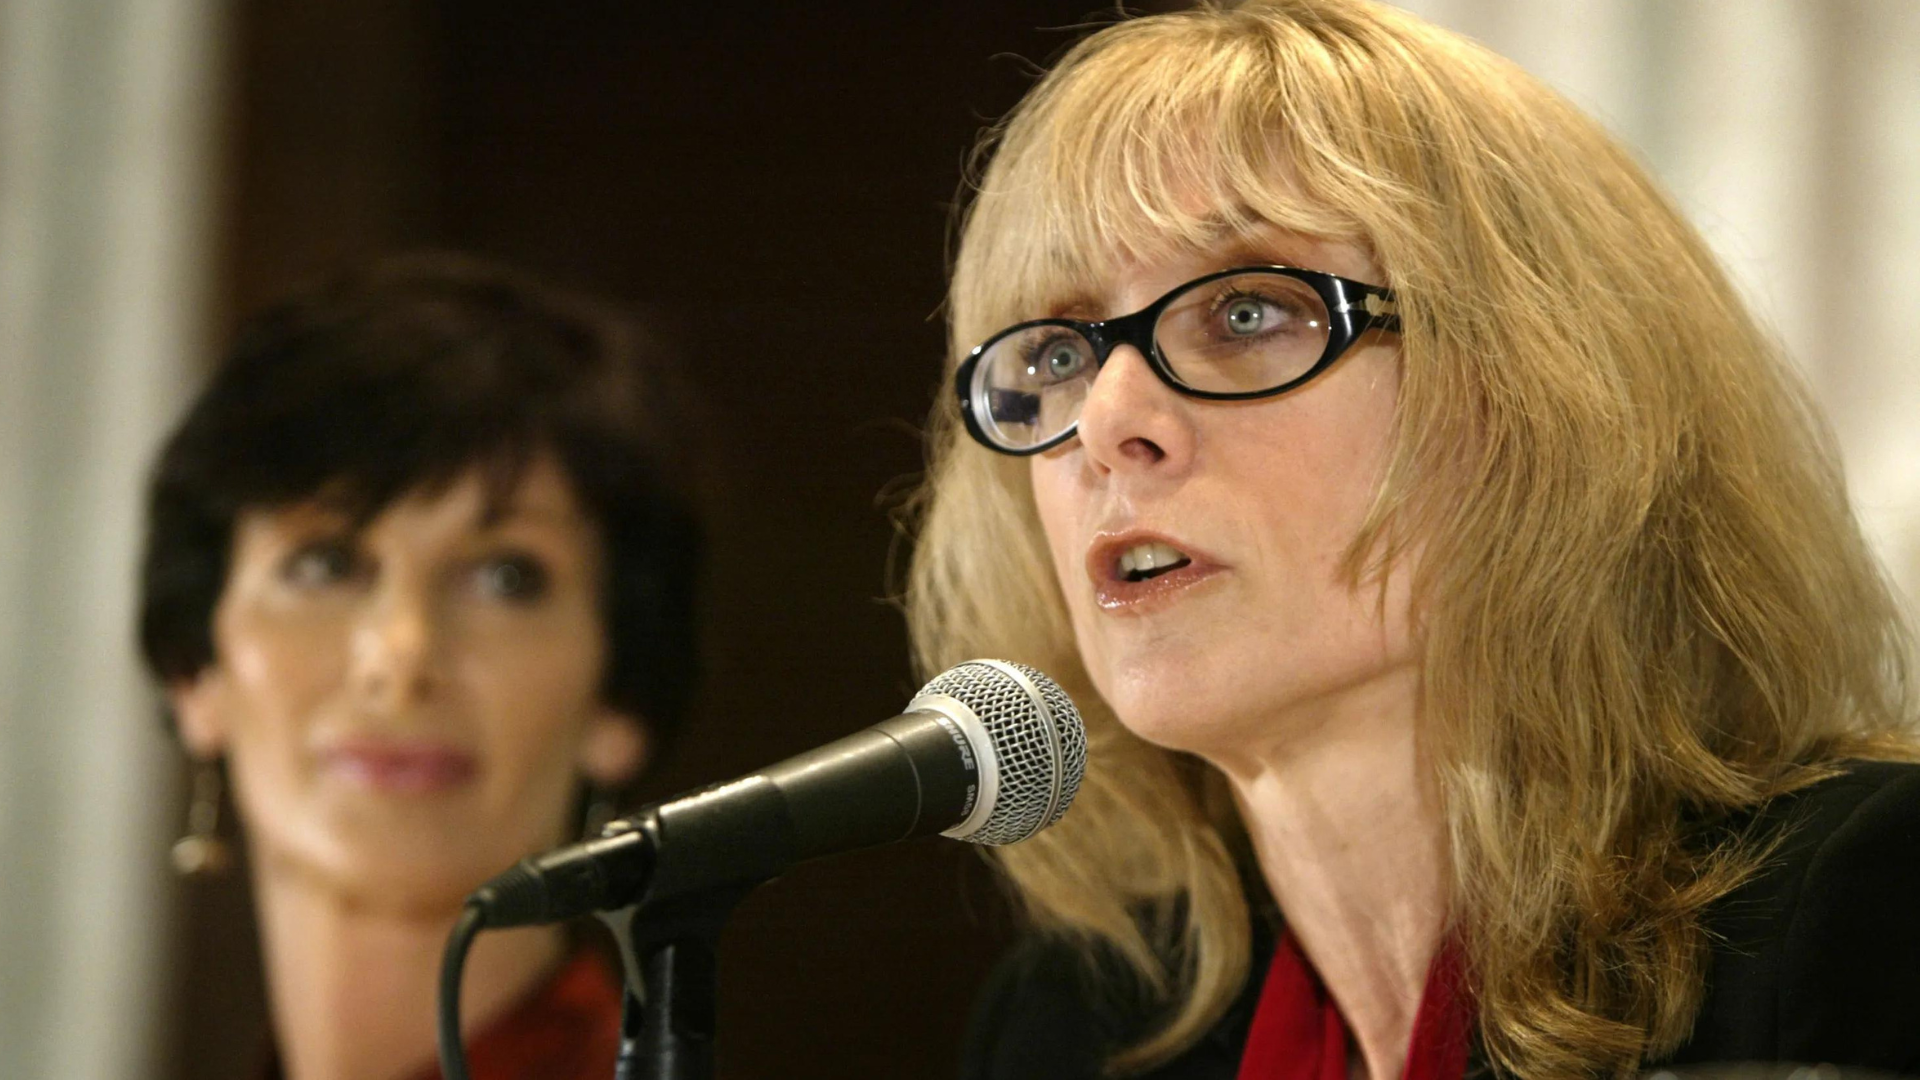  Nina Hartley speaking in front of a microphone